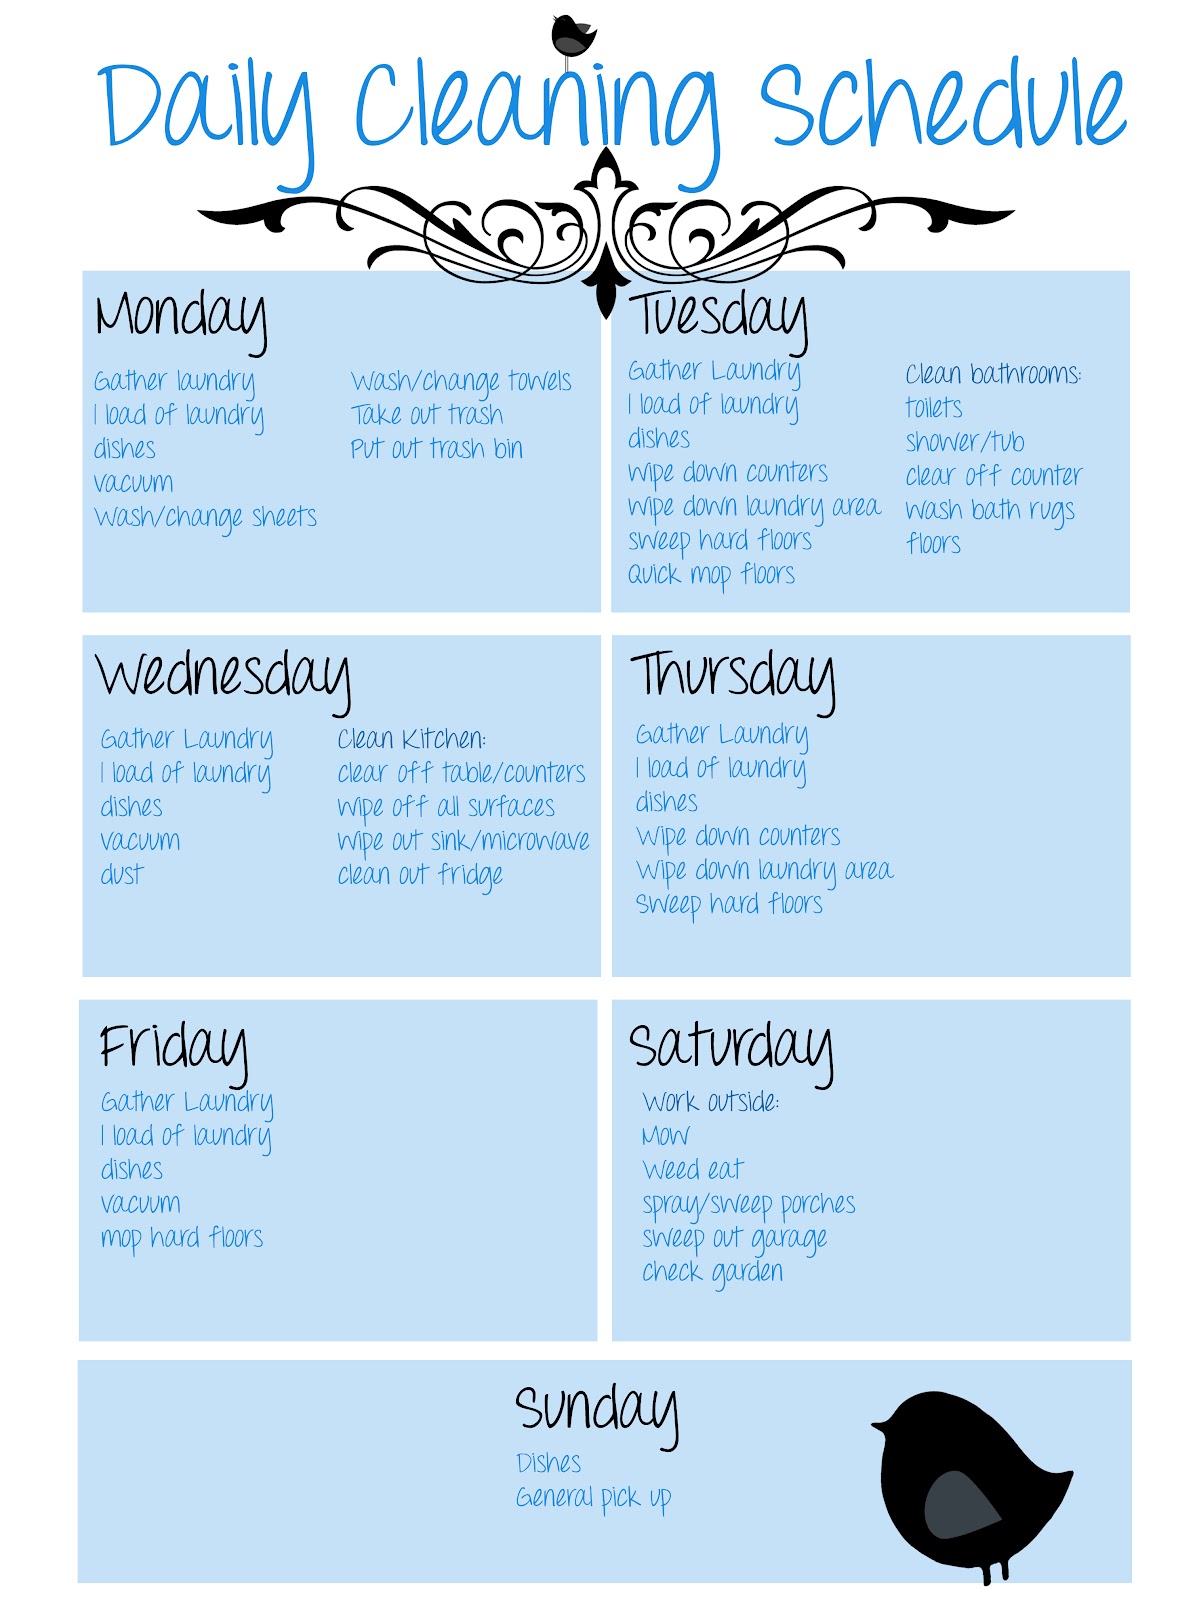 La Dolce Vita: Daily Cleaning Schedule